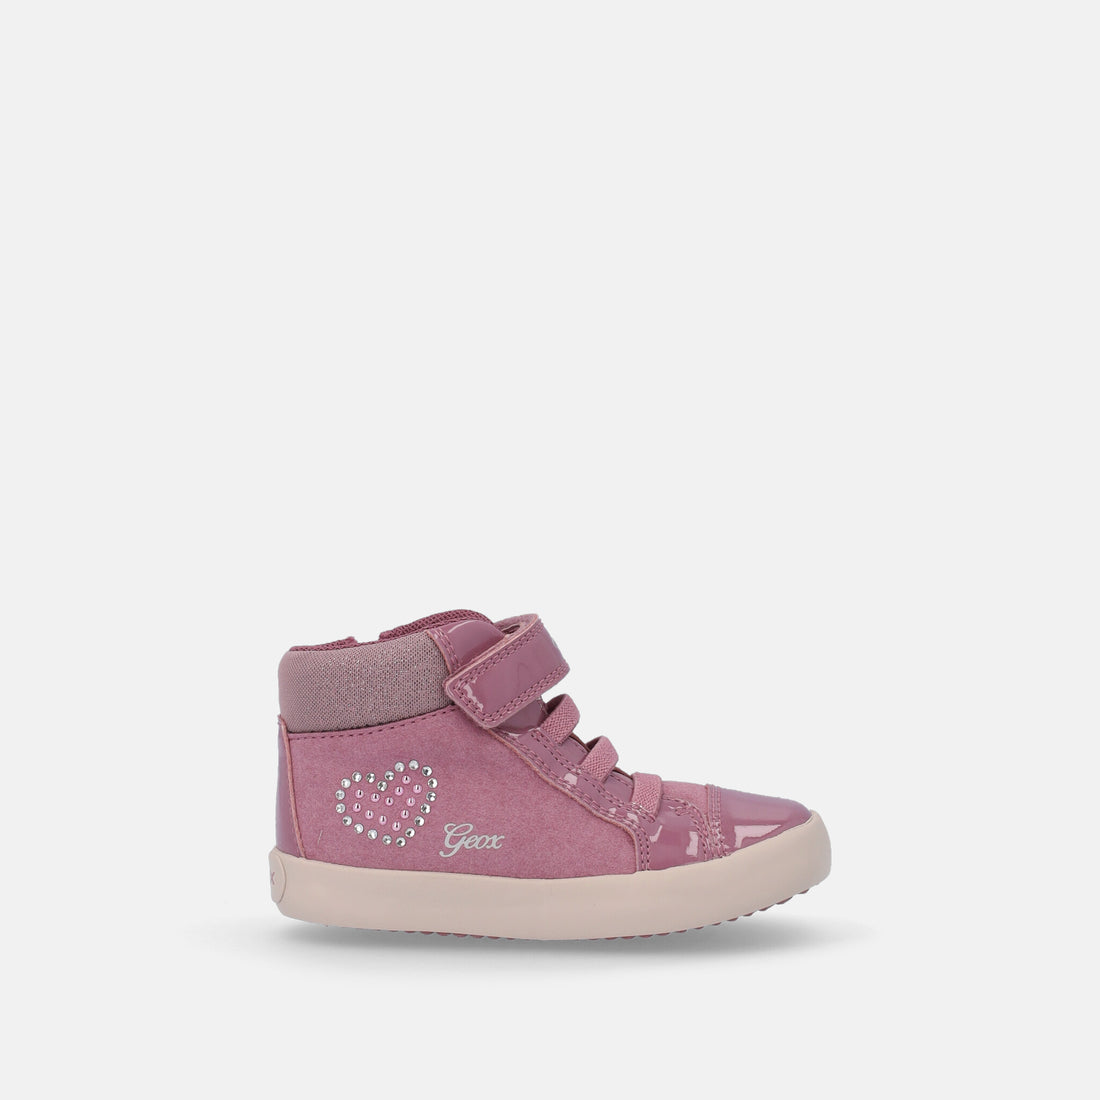 Sneakers bambina Geox colorate